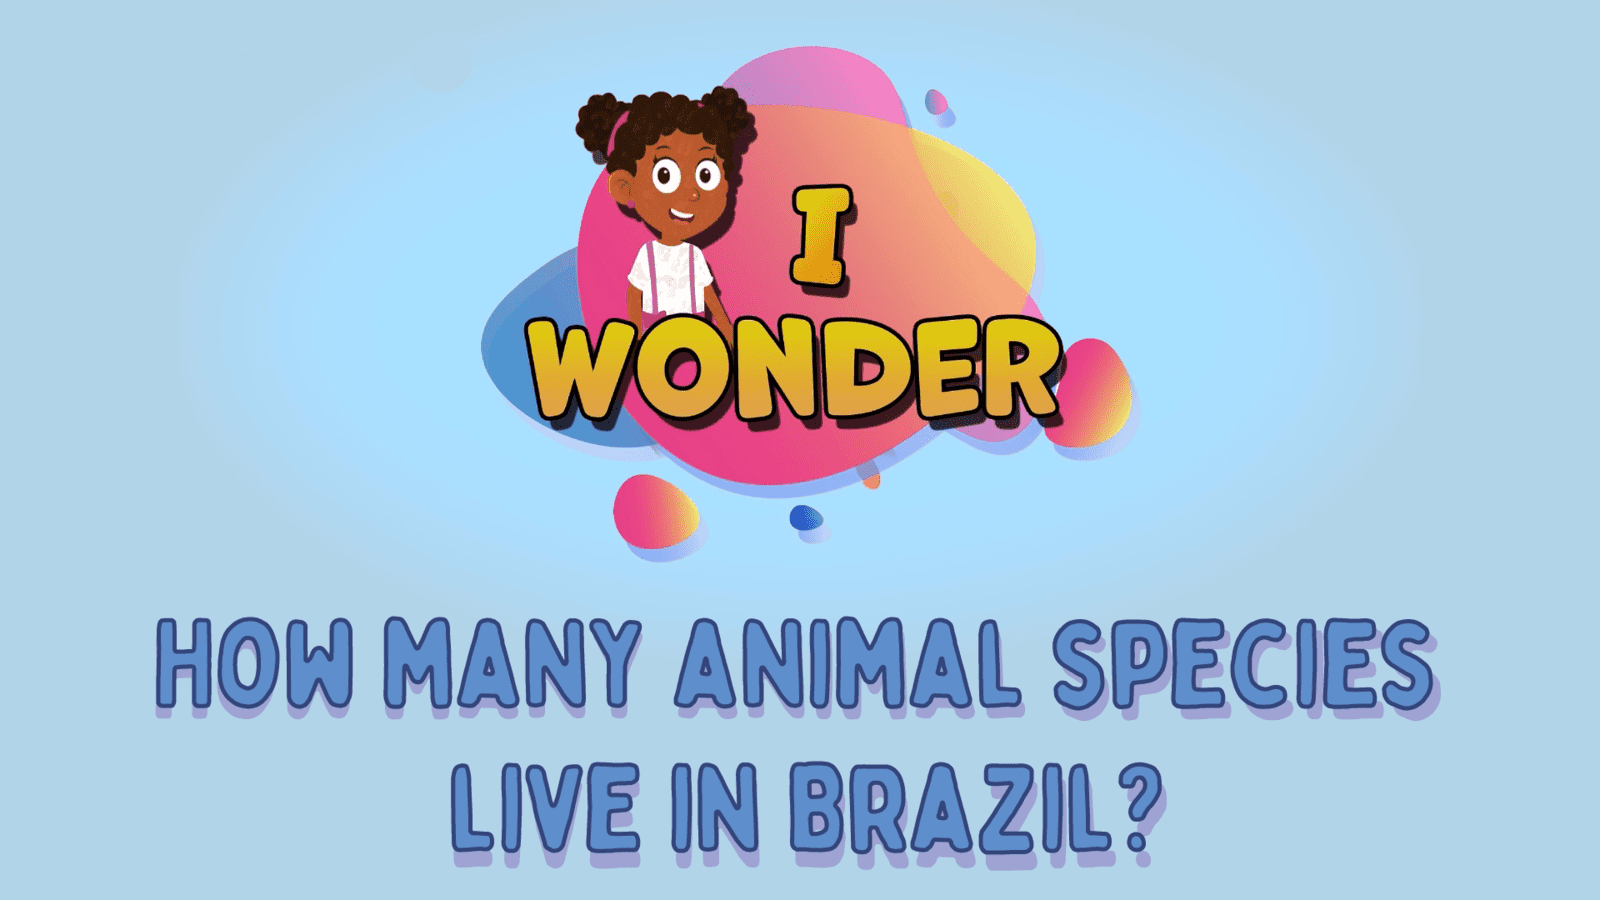 How Many How Many Animal Species Live In Brazil?